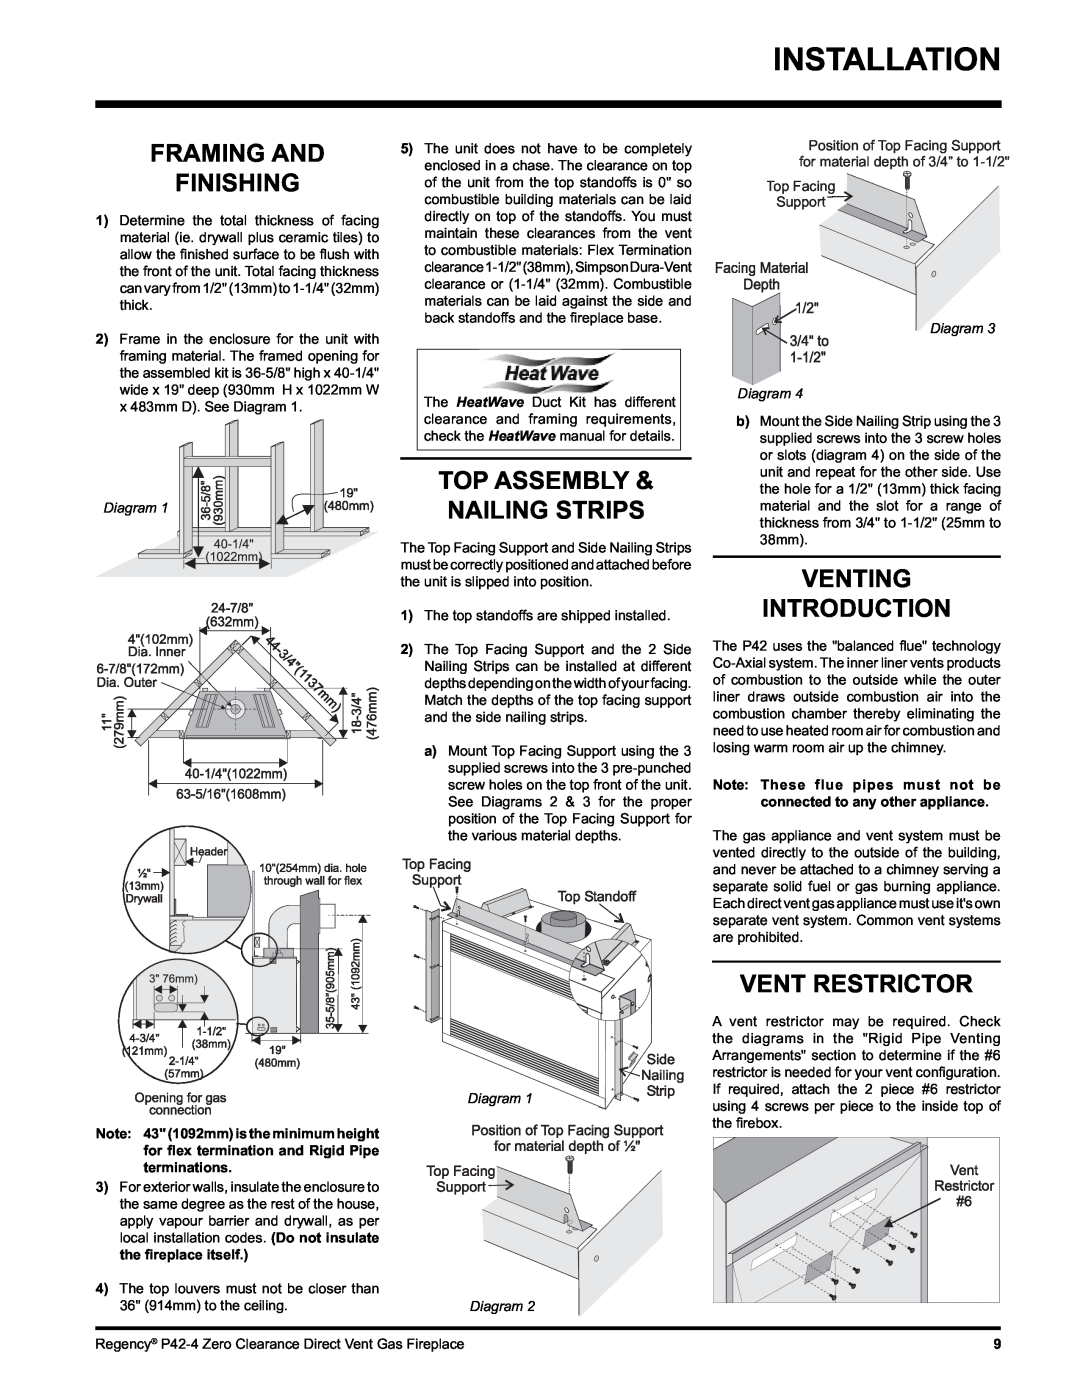 Regency P42-LP4 Framing And Finishing, Top Assembly & Nailing Strips, Venting Introduction, Vent Restrictor, Diagram 